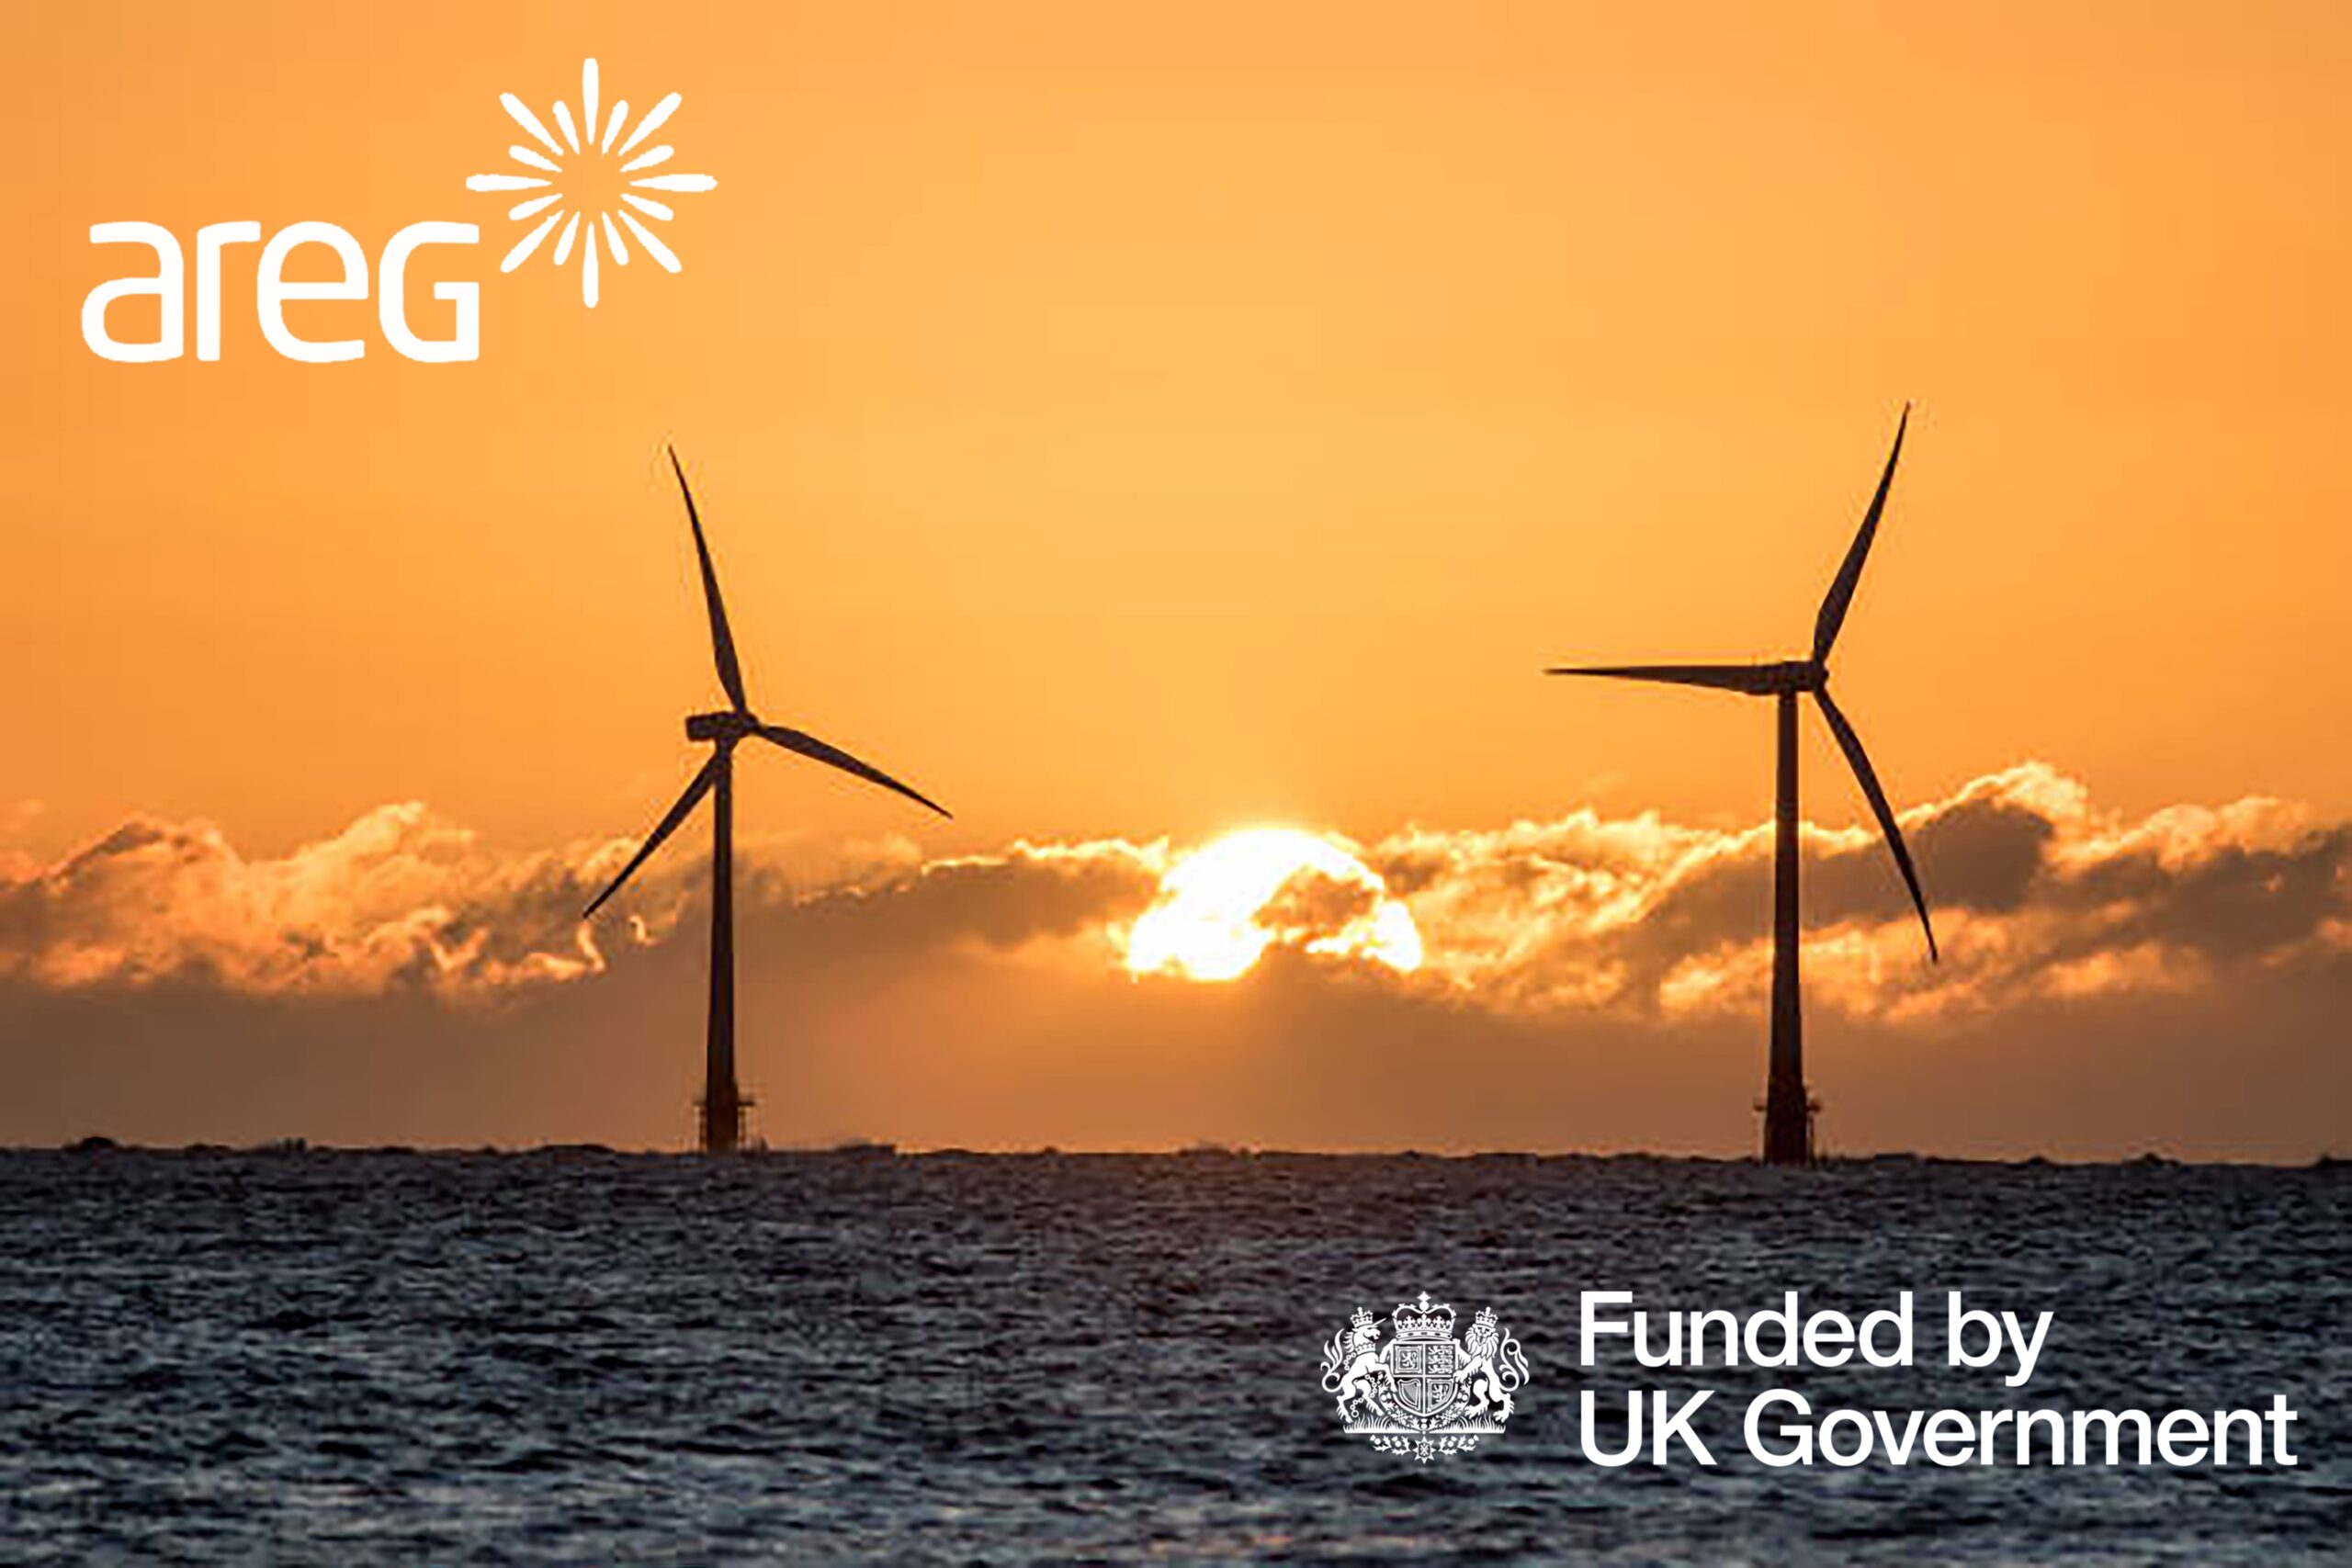 AREG NEWS: AREG and Aberdeen City Council Partner to Propel Offshore Wind Renewables with £45,000 UKSPF Shared Prosperity Funding